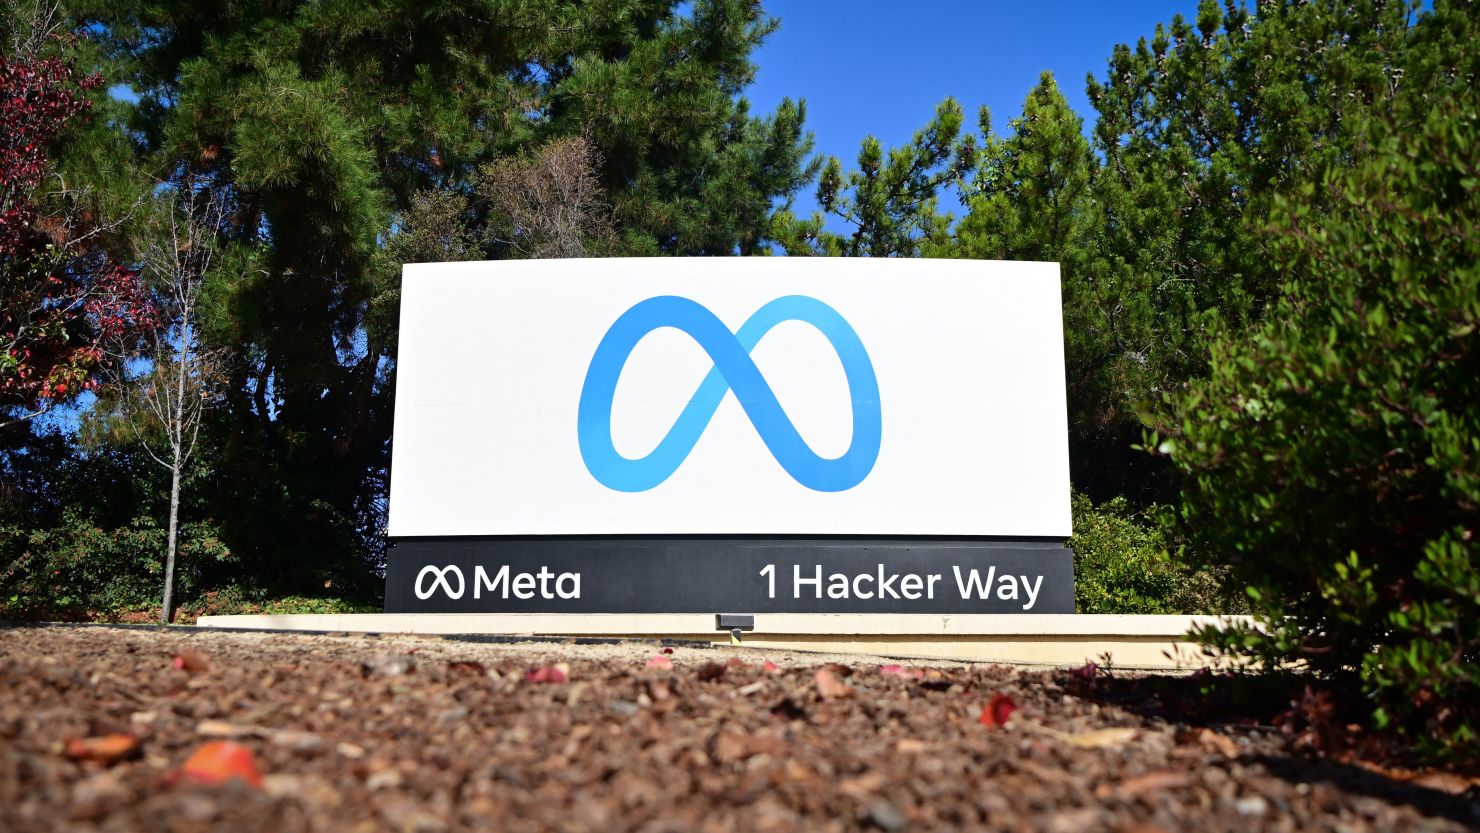 The Meta (formerly Facebook) logo marks the entrance of their corporate headquarters in Menlo Park, California.